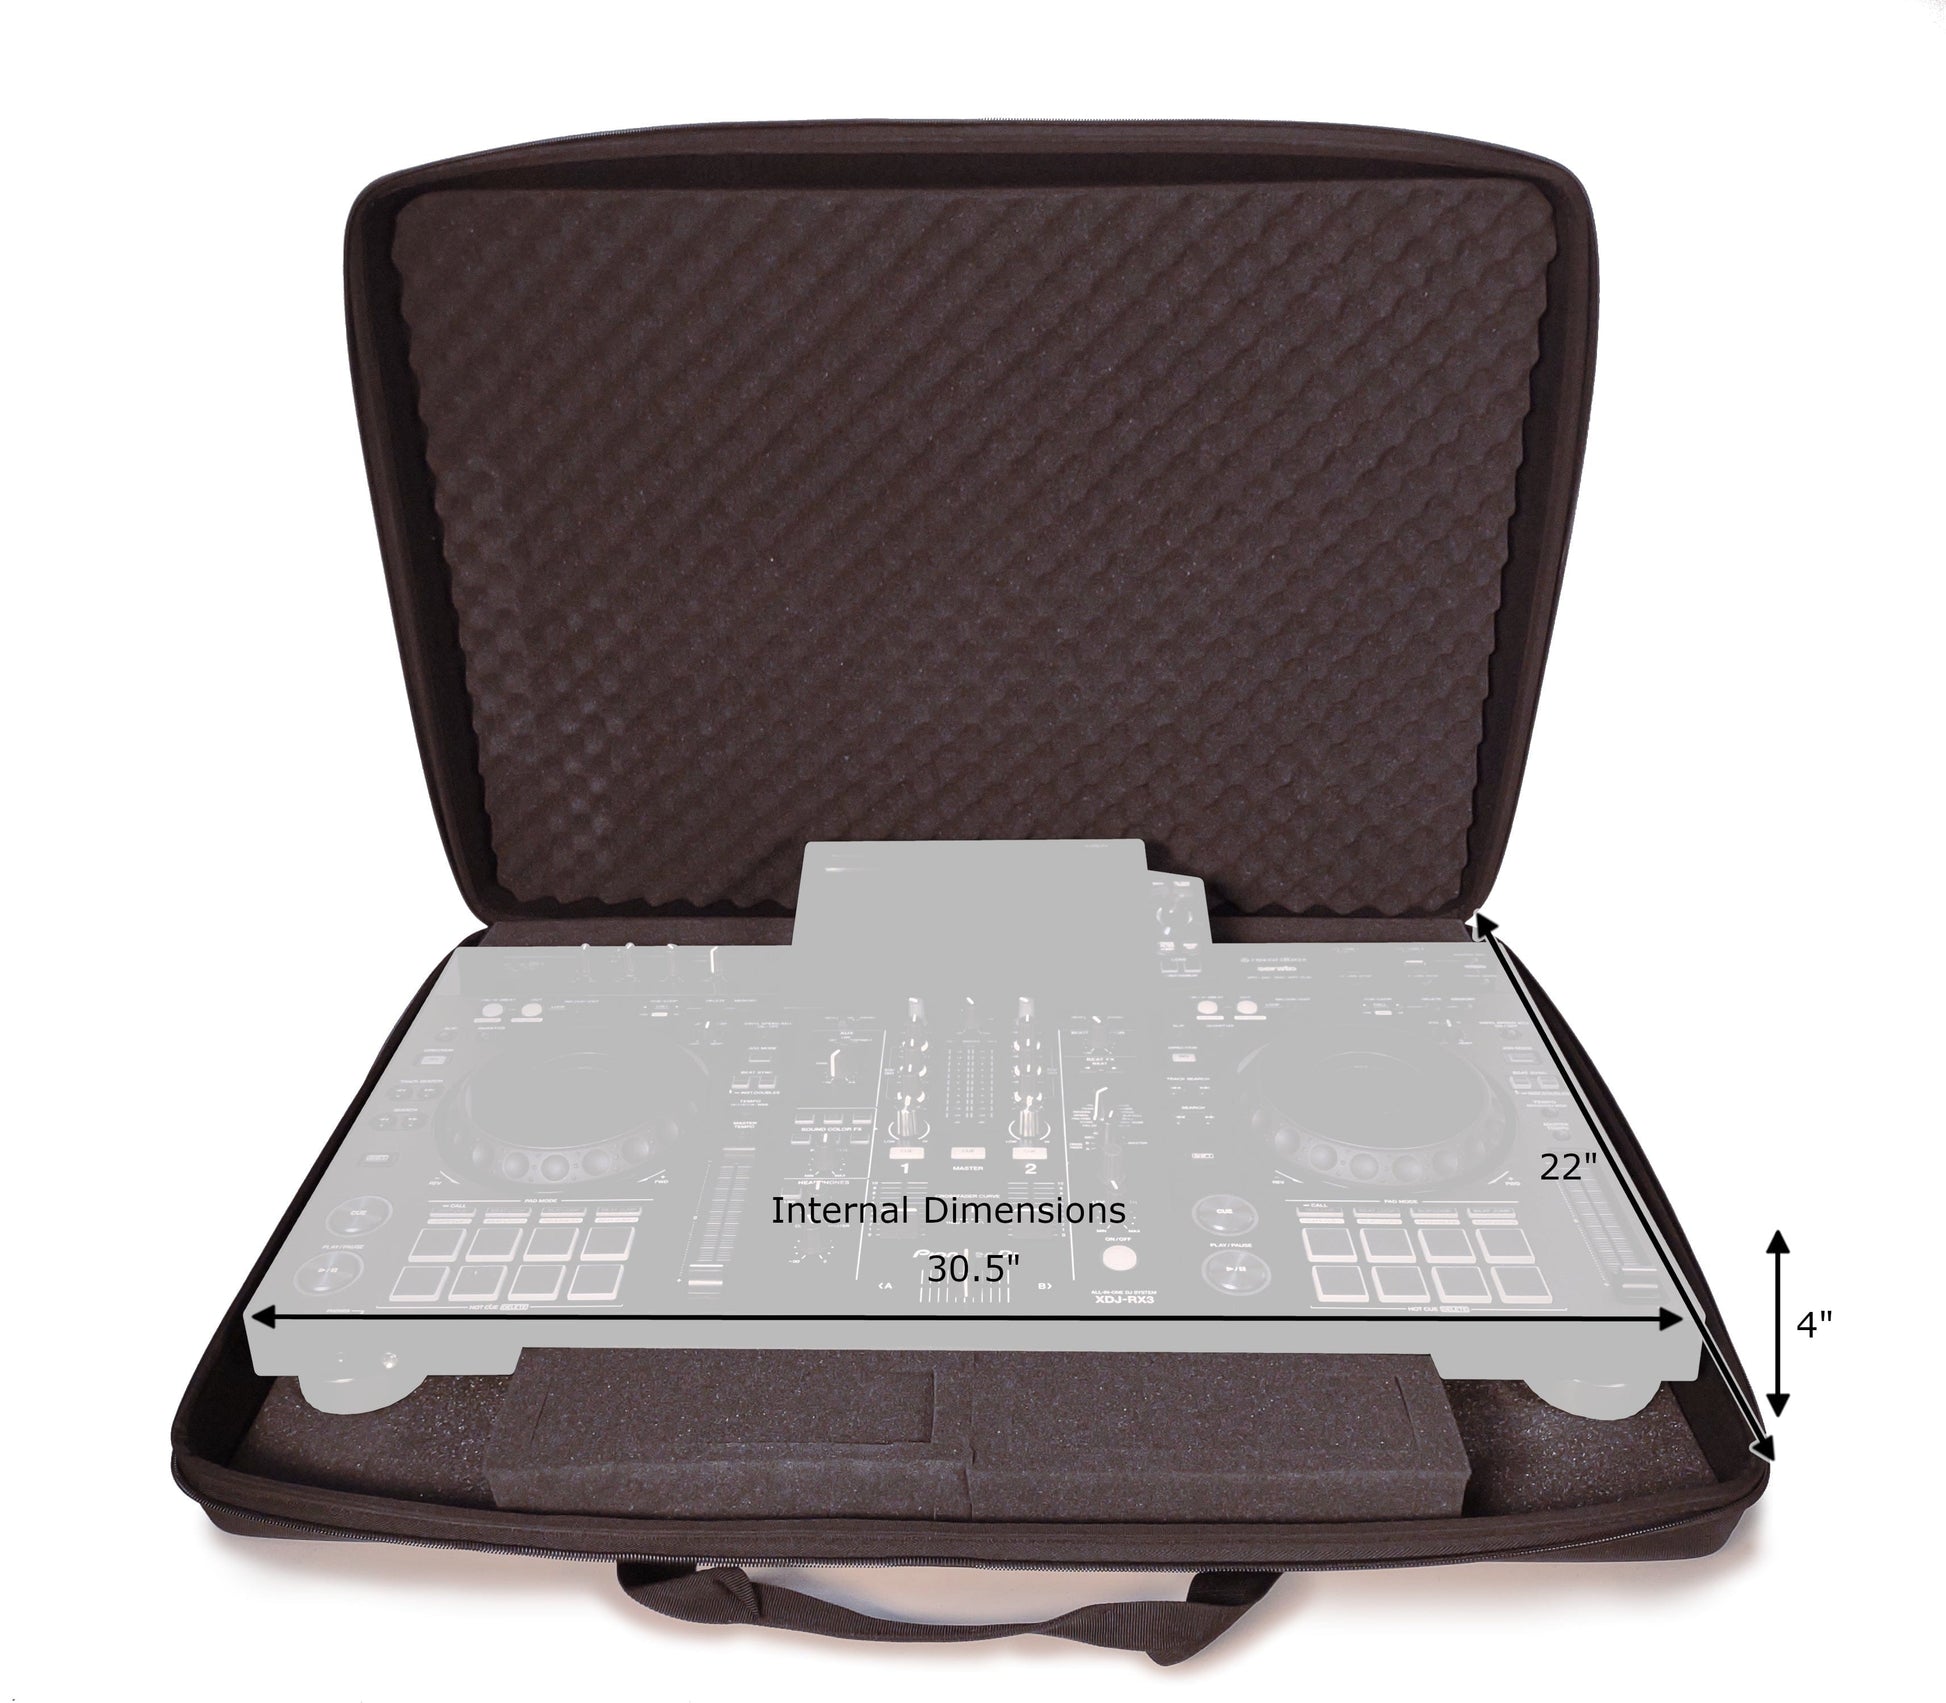 Solena Soft Case for XDJ-RX3 Controller - PSSL ProSound and Stage Lighting